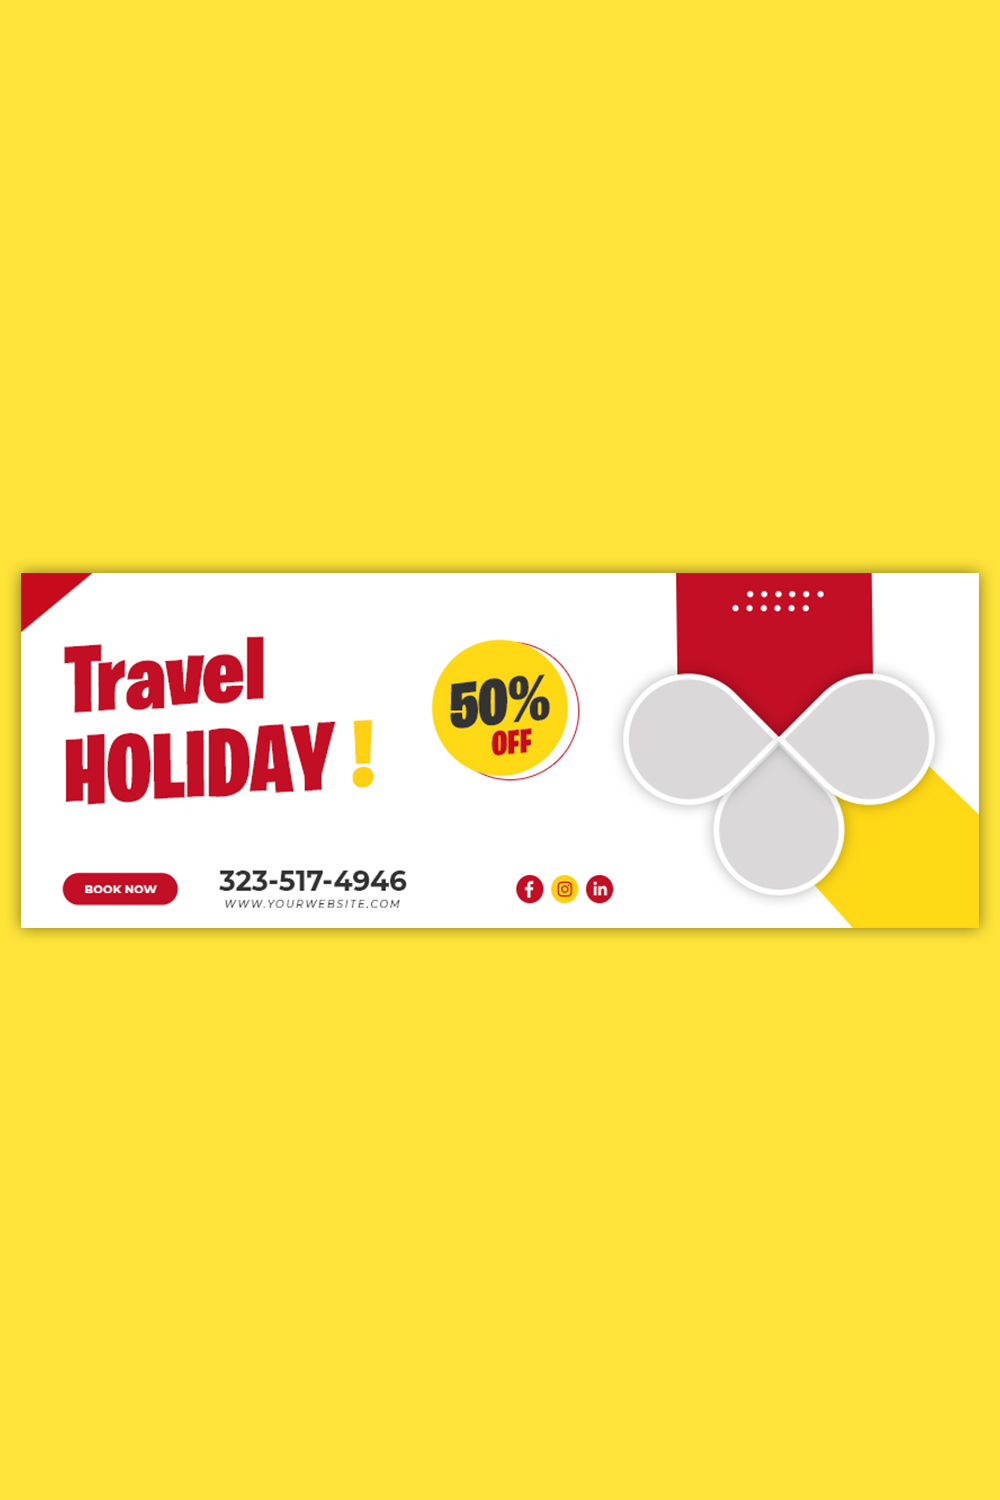 Travel Holiday Facebook cover Template pinterest preview image.